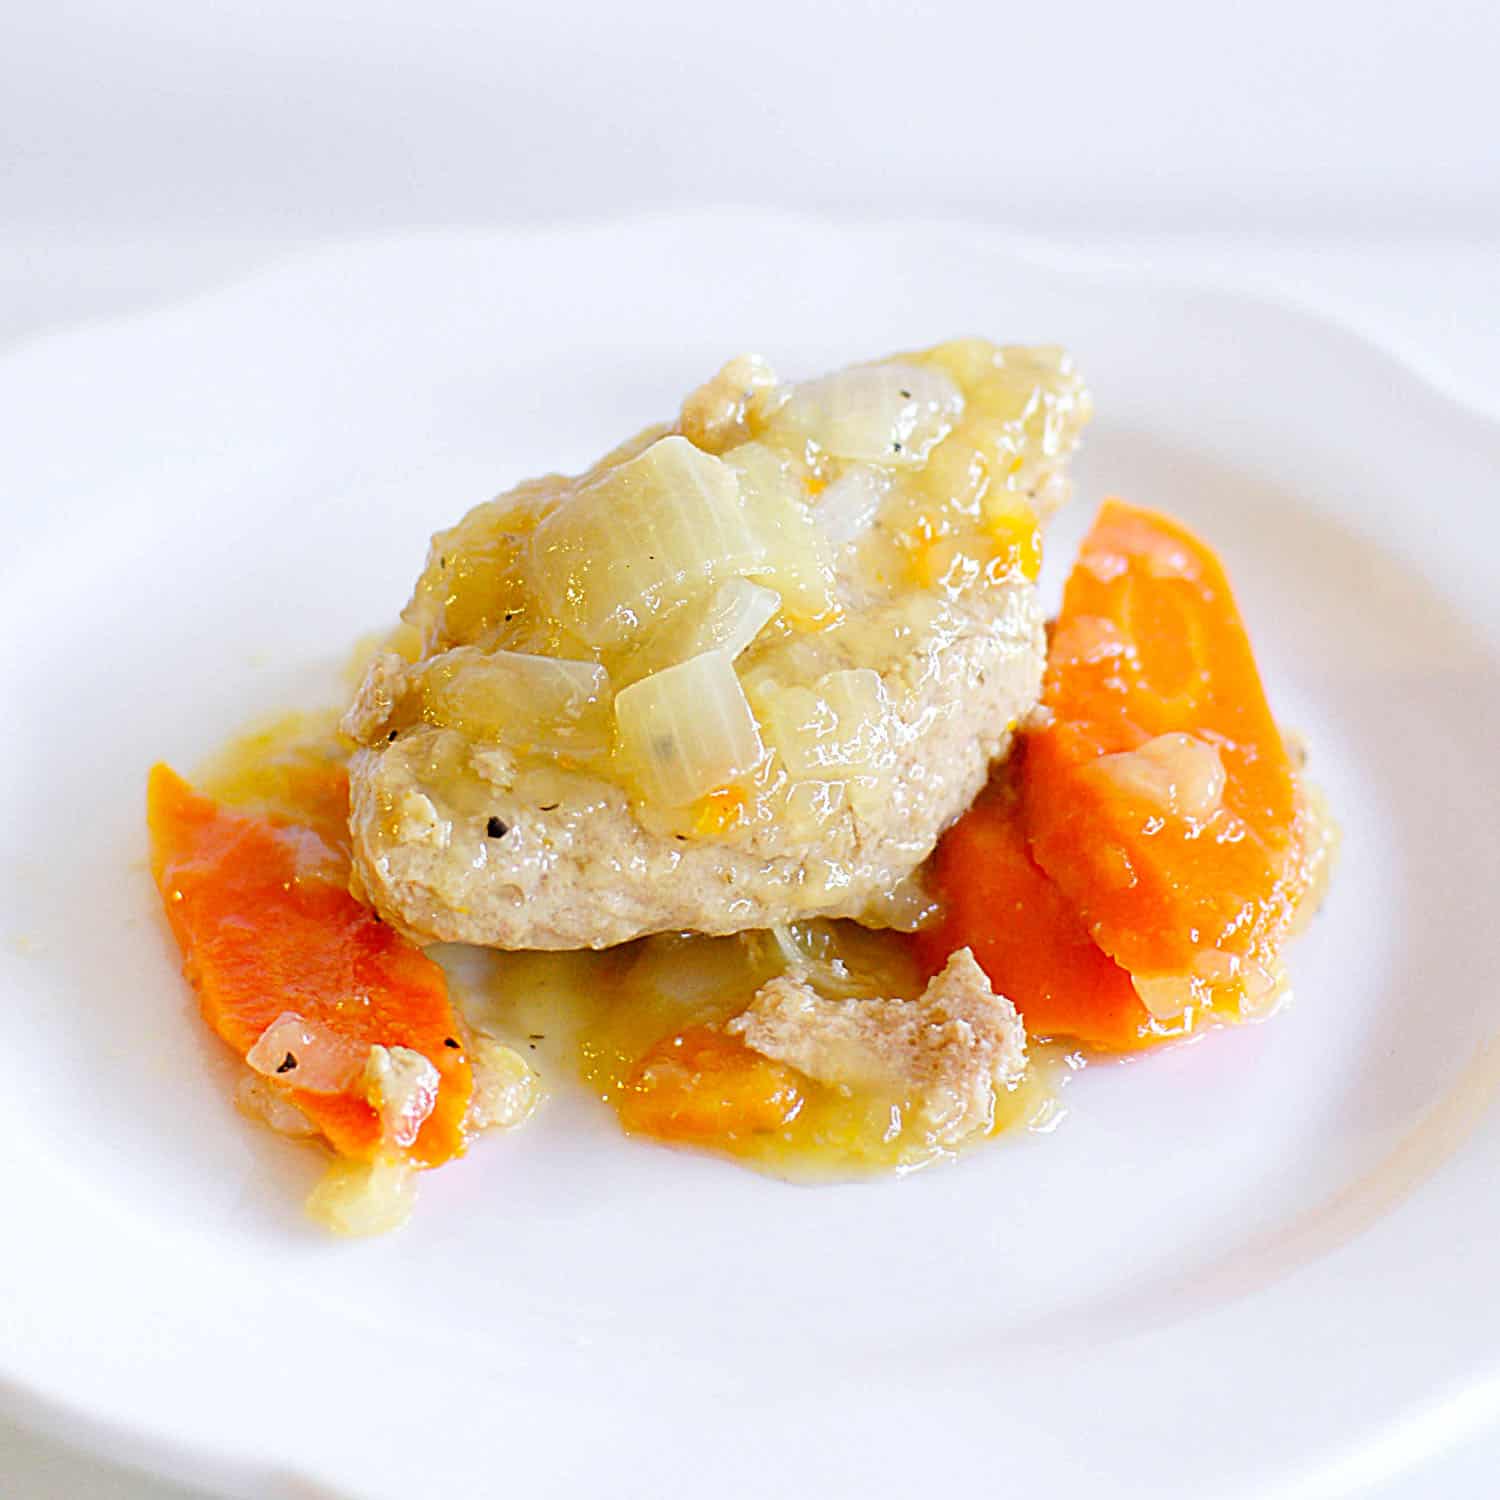 Gefilte fish on a white plate.